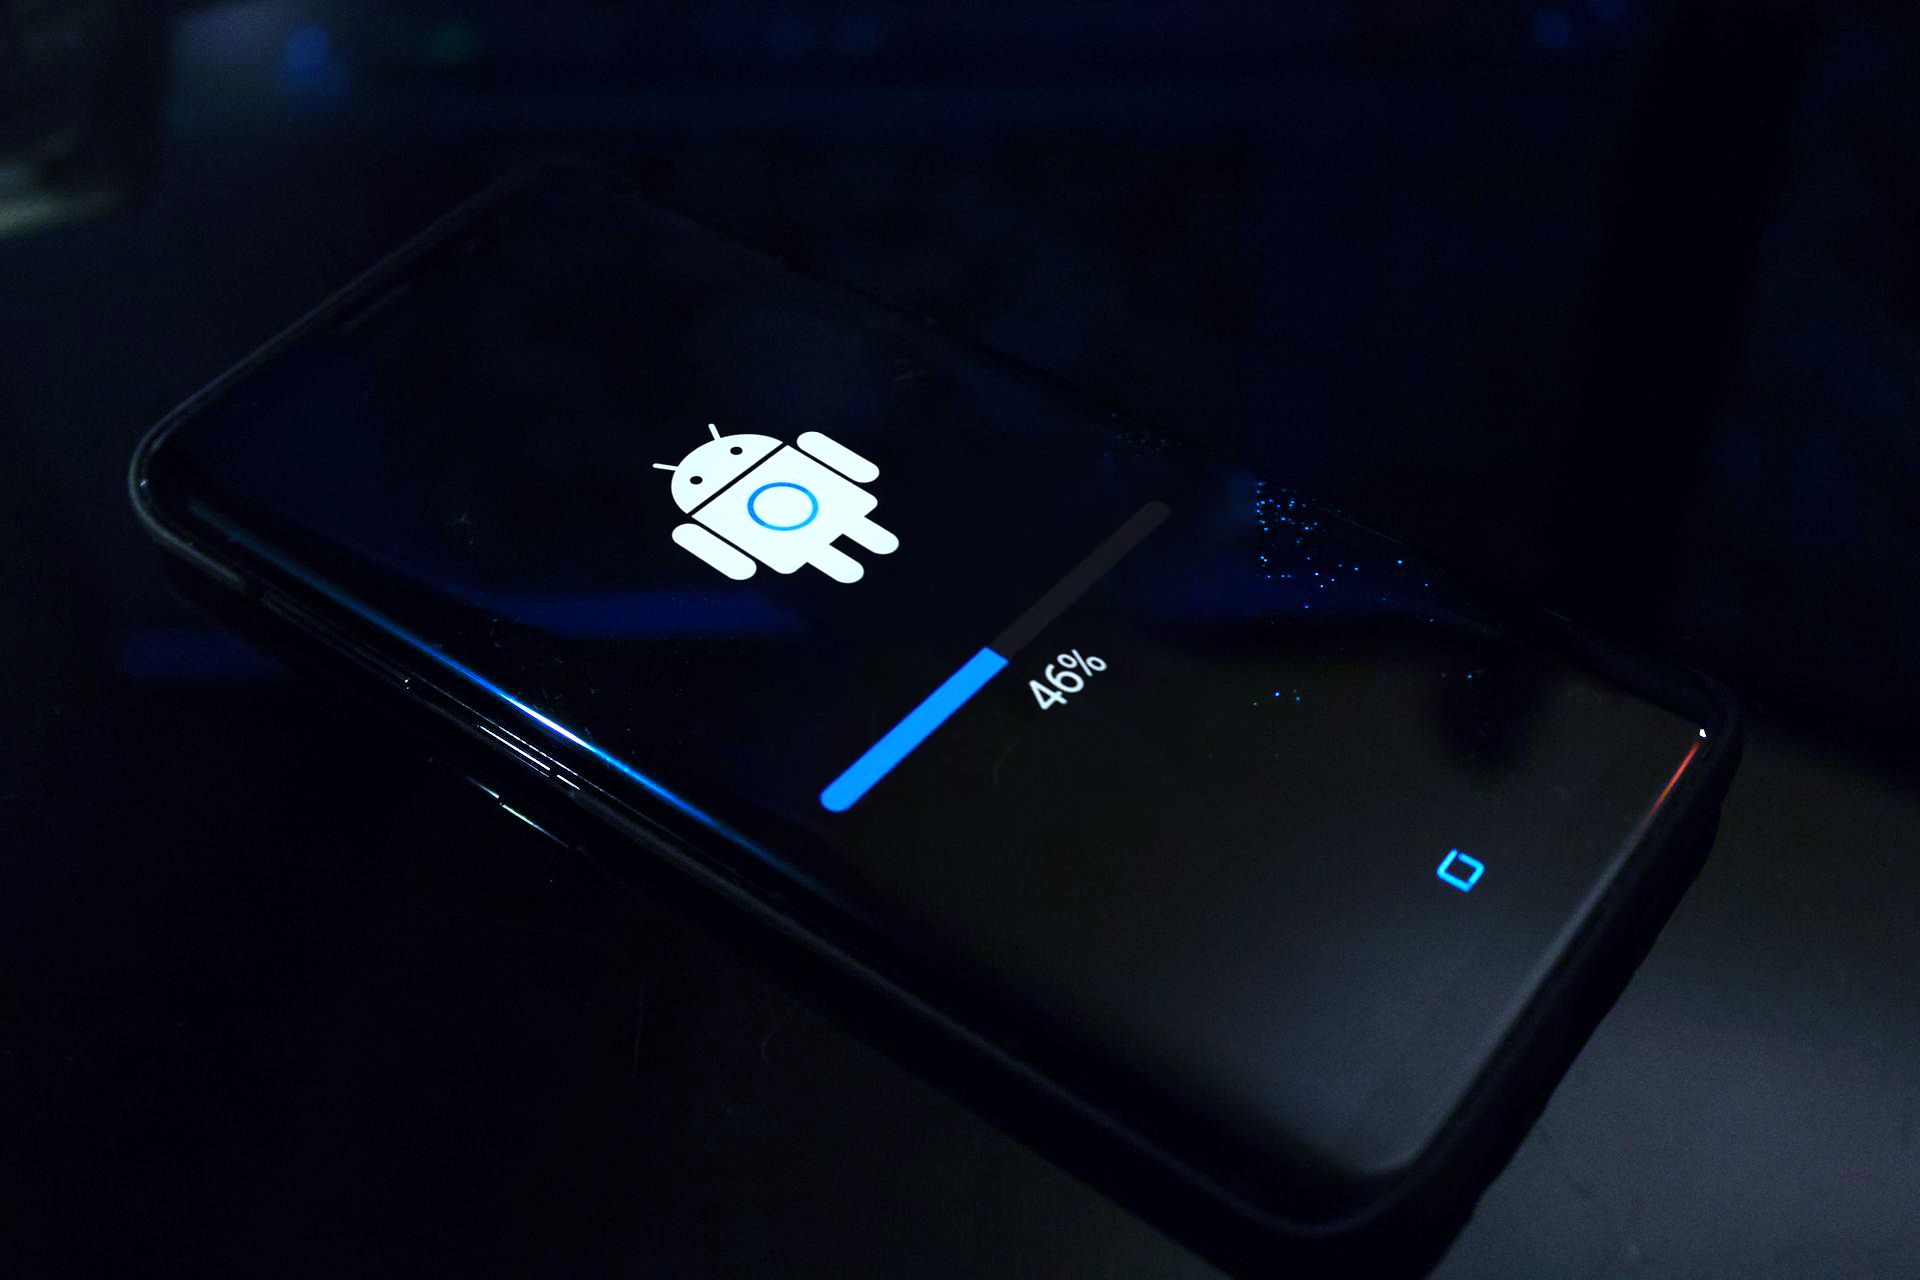 An Android smartphone lying on a surface, displaying an update screen with an Android robot icon and a progress bar indicating 46% completion.